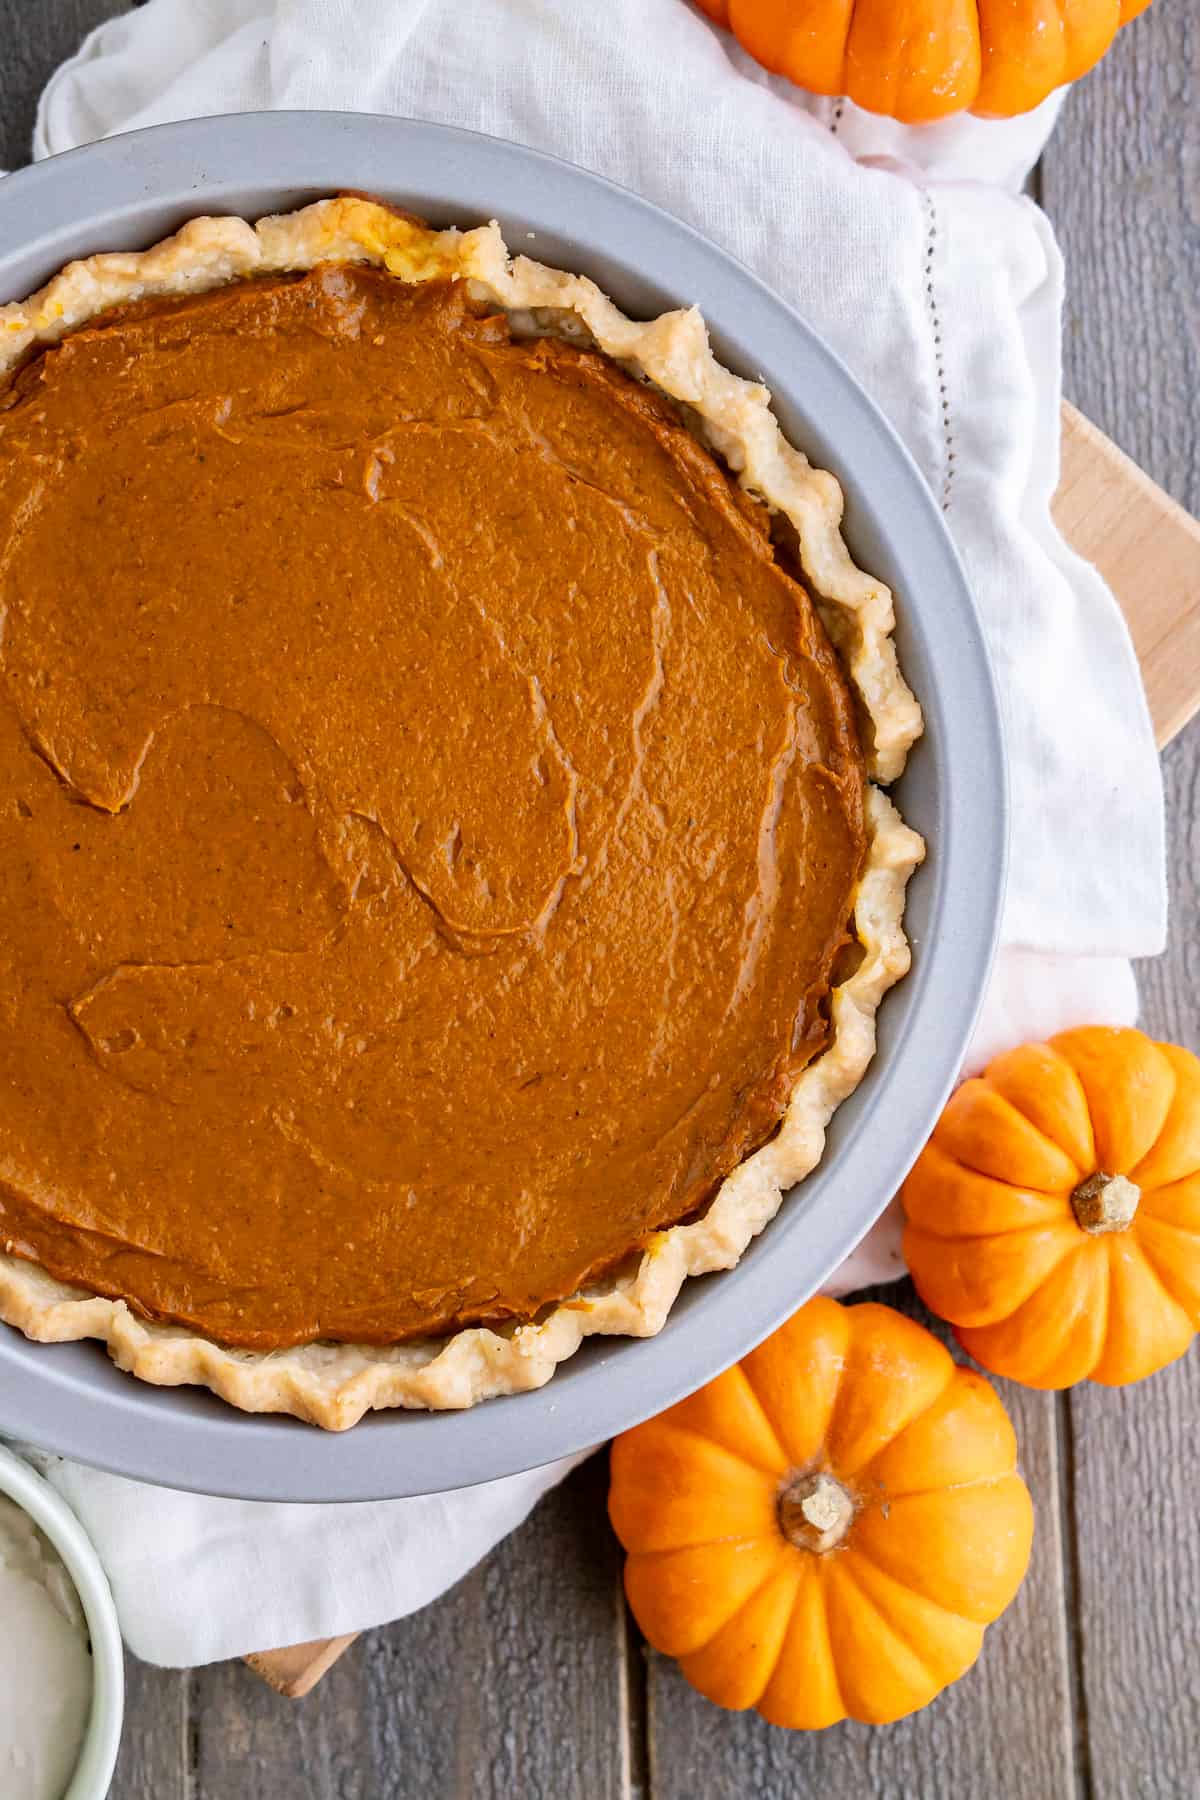 A Freshly baked Vegan and Gluten-Free Pumpkin Pie surrounded by mini pumpkins.